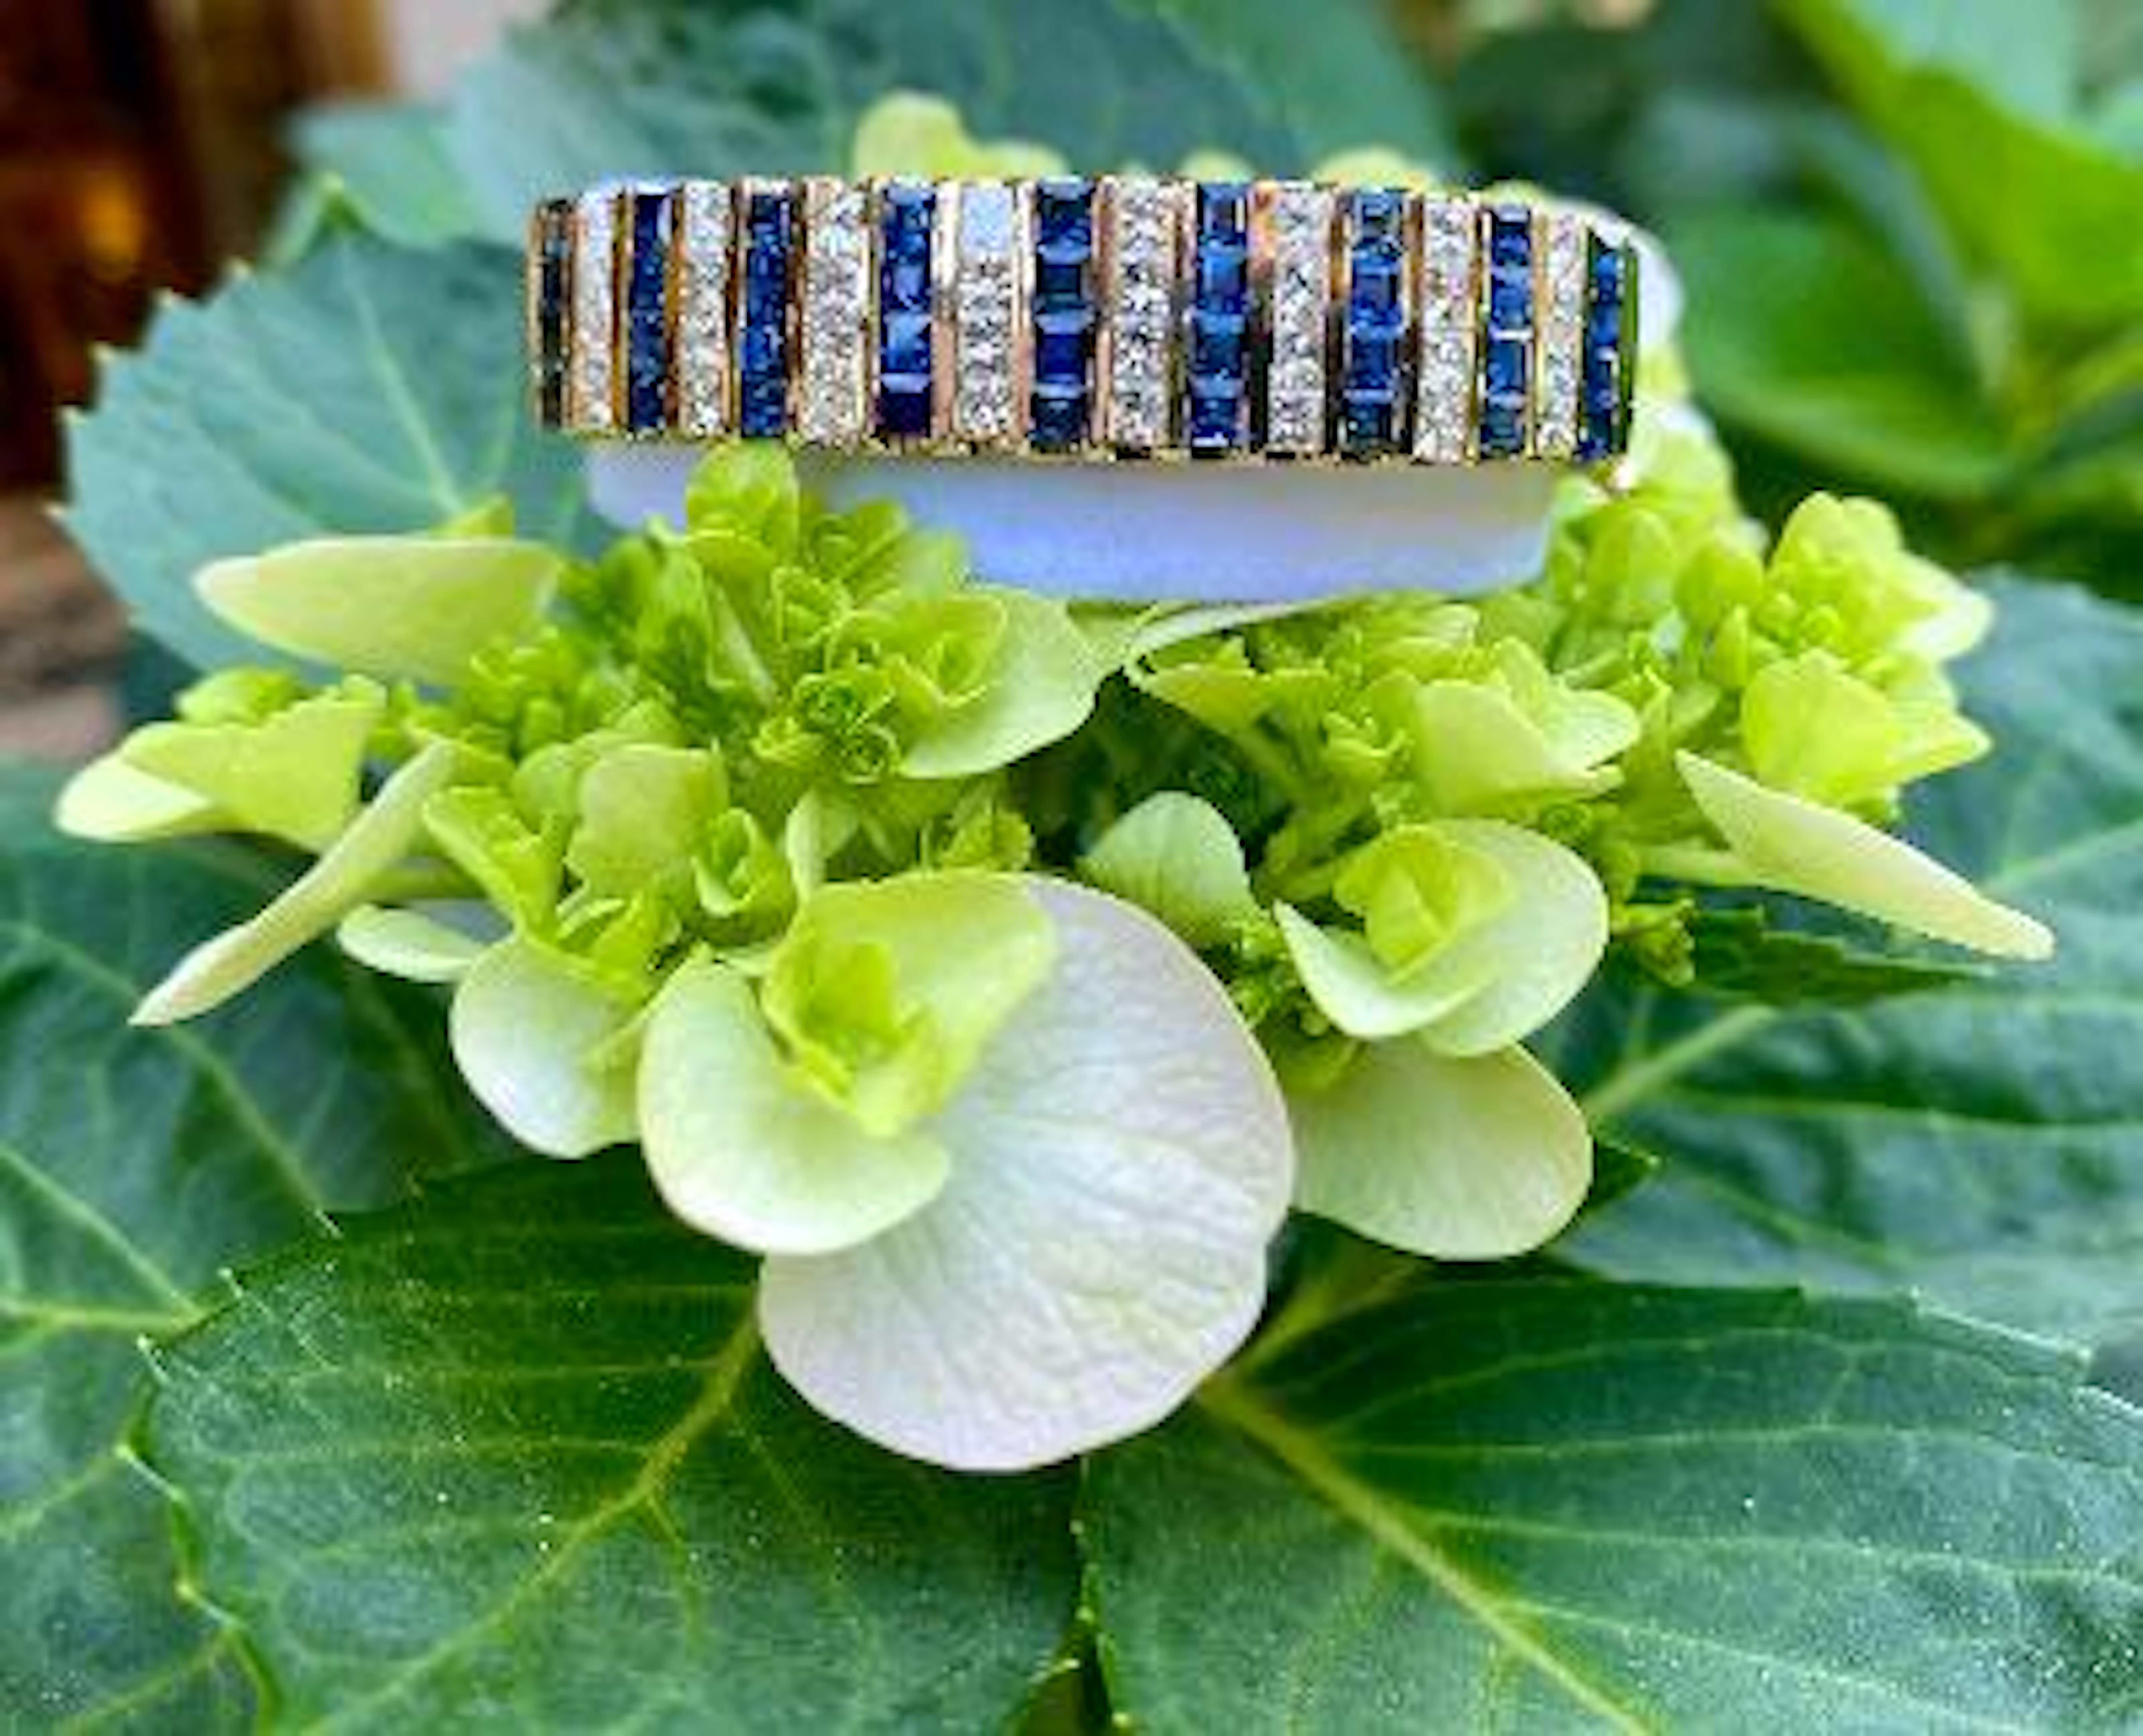 Sparkling diamond and sapphire 14 karat yellow gold estate hinged bangle bracelet features 17 rows of invisibly channel set princess cut white diamonds and square blue sapphires separated between 18 rows of vertical 14 karat gold sections. The total